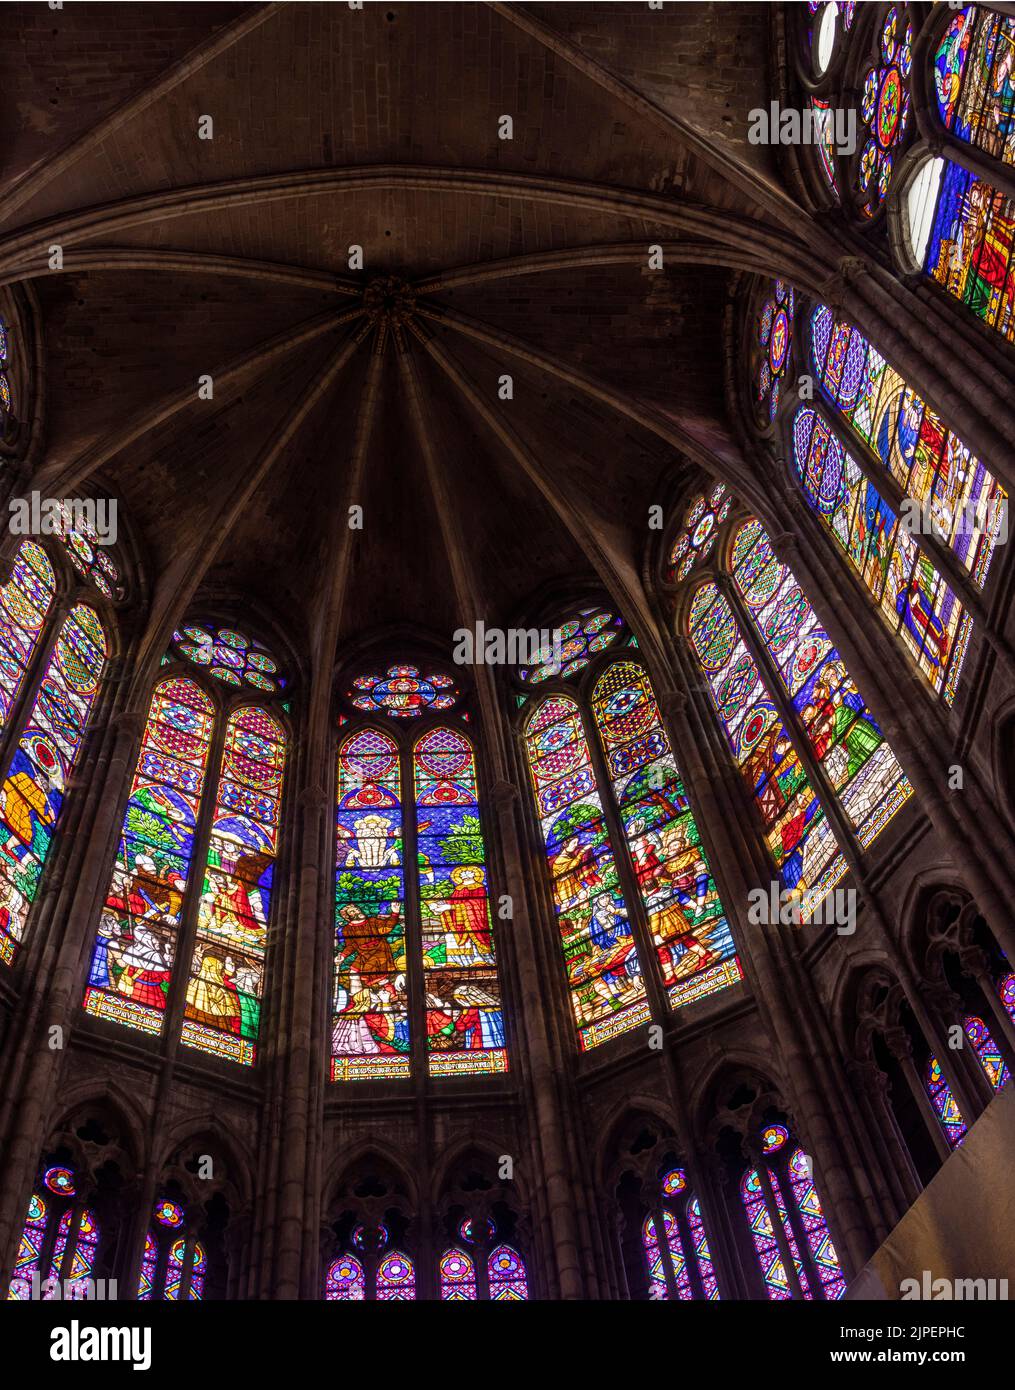 stained glass of apse, 12th century, Saint-Denis basilica, Paris, France Stock Photo